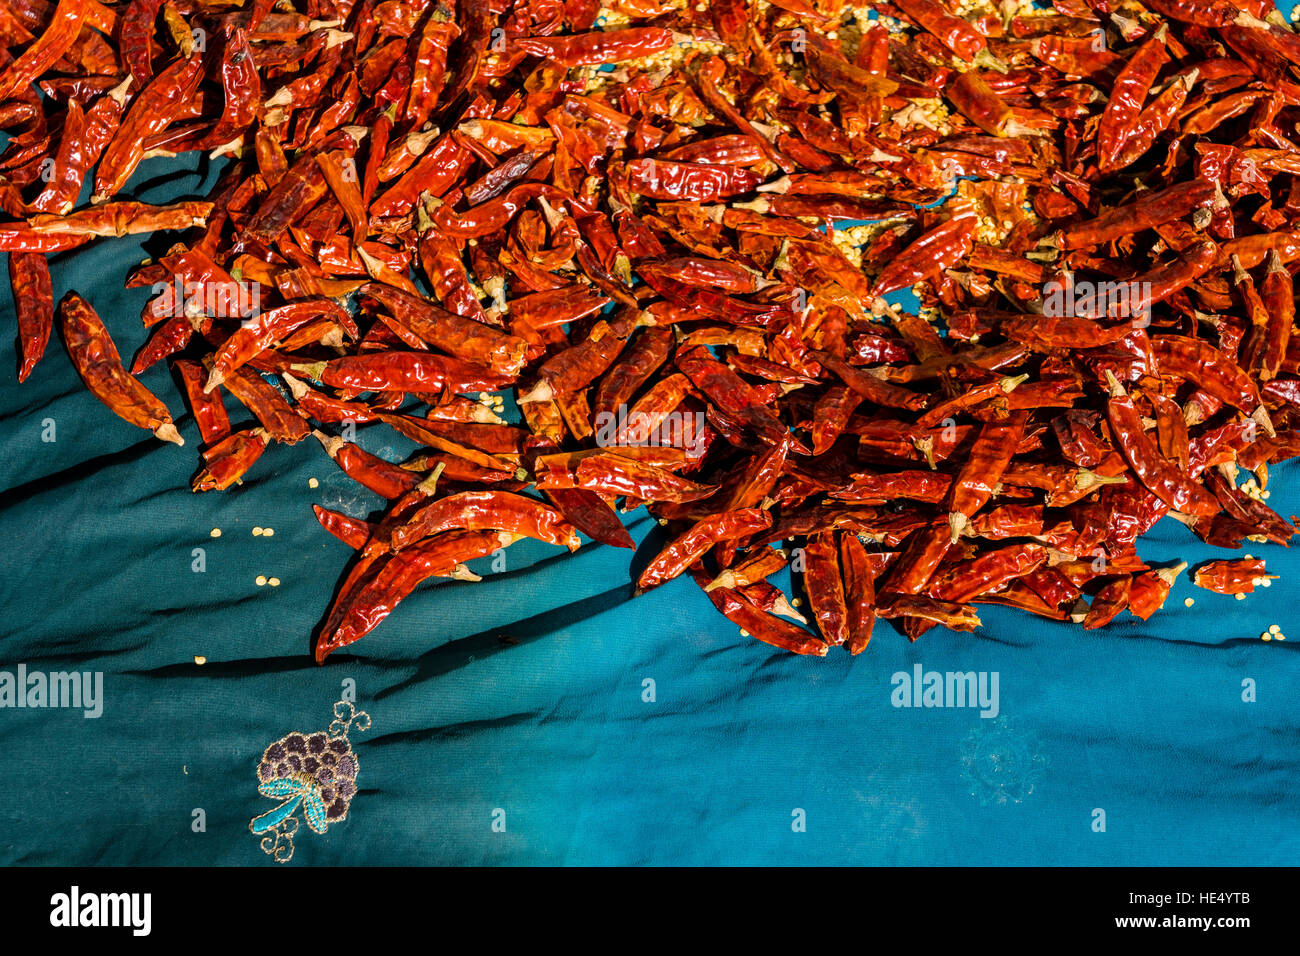 Red chili's are drying in the sun on a blue blanket Stock Photo